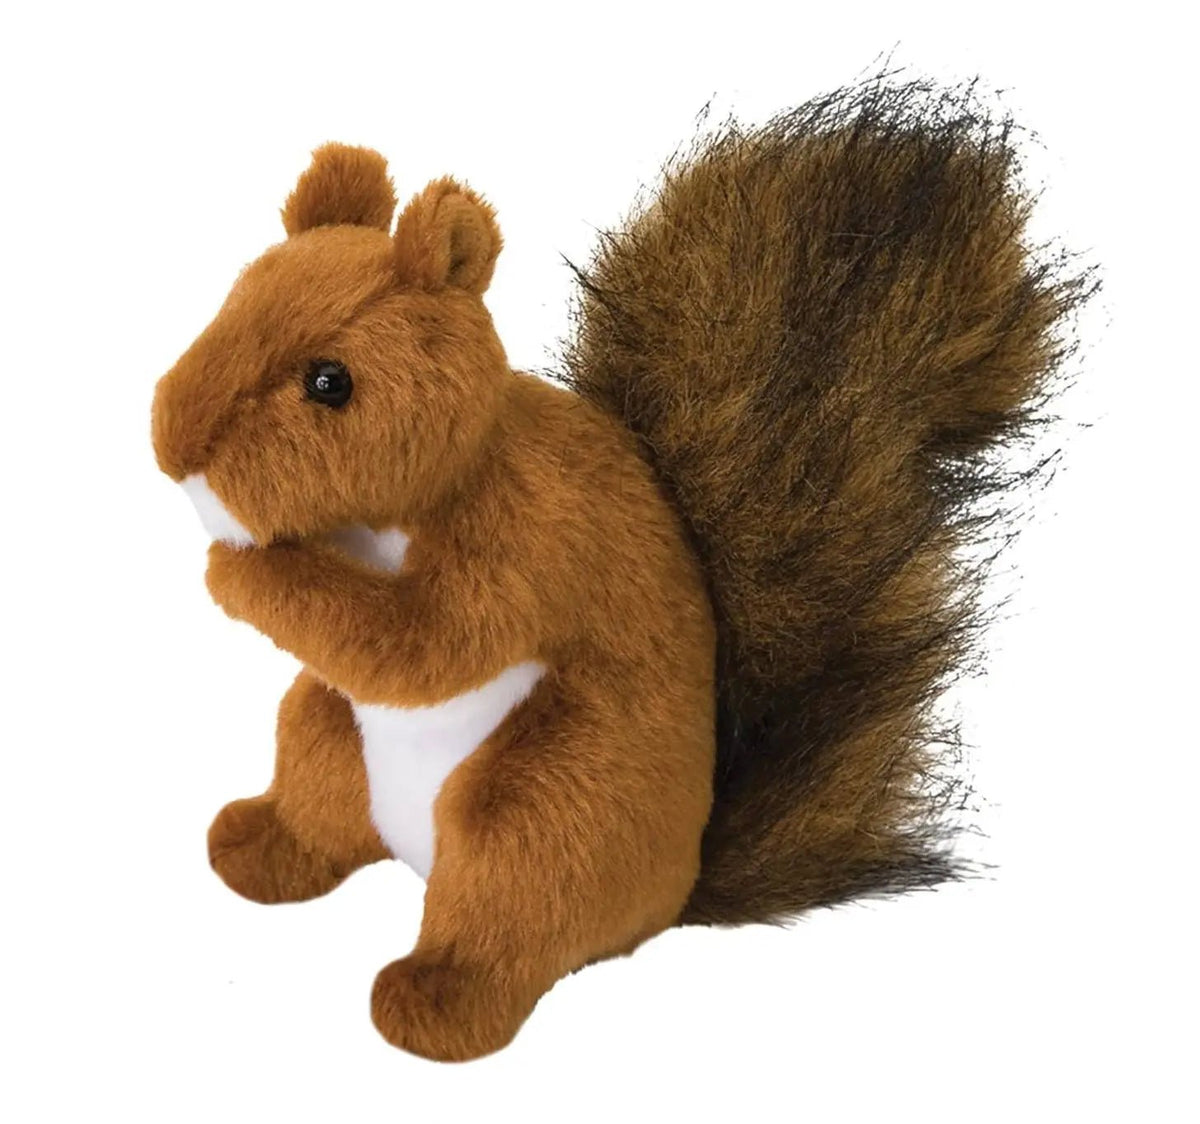 A Douglas plush toy Roadie Red Squirrel sitting on a white background.